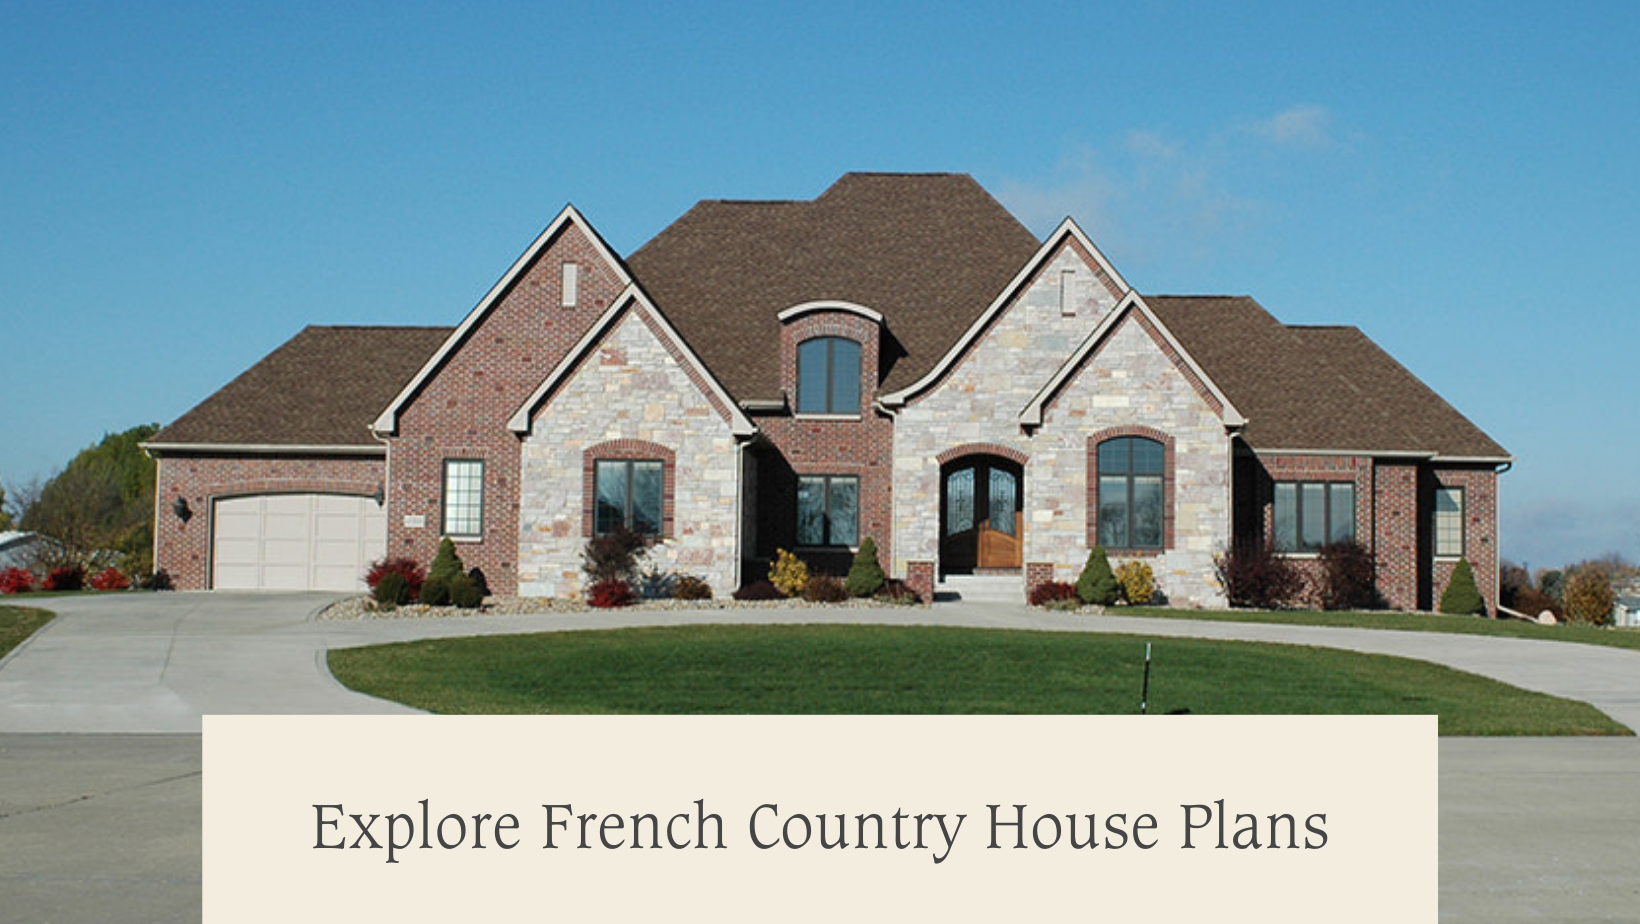 Explore French Country House Plans